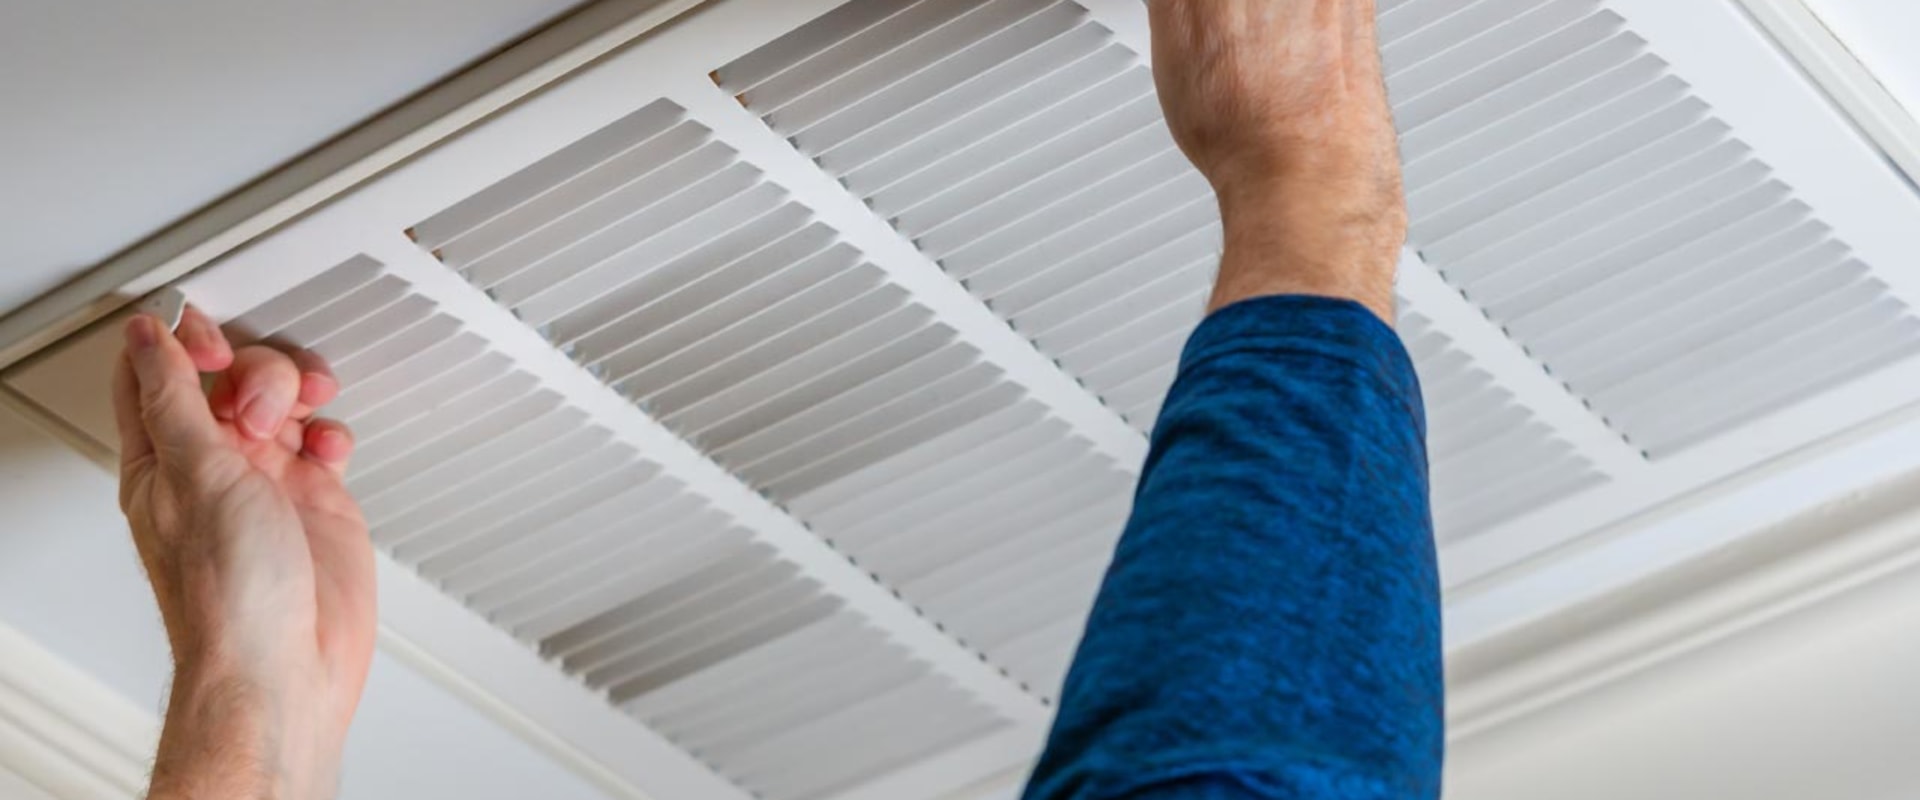 The Benefits of Sealing Air Ducts: An Expert's Perspective